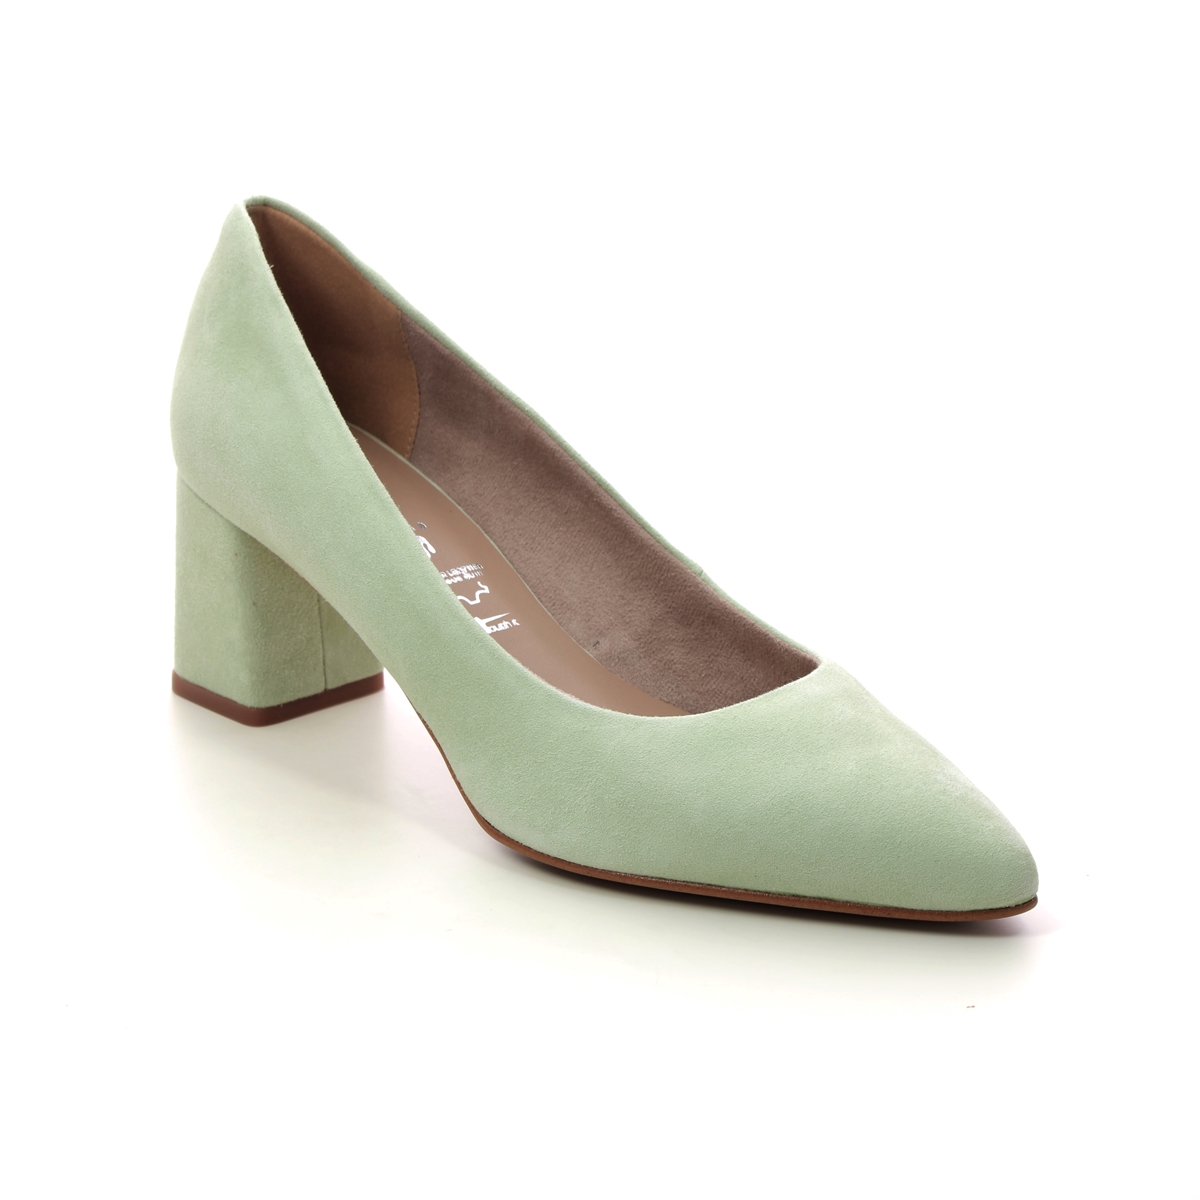 Tamaris Edan Block 65 Mint green Womens Court Shoes 22435-20-760 in a Plain Leather in Size 36